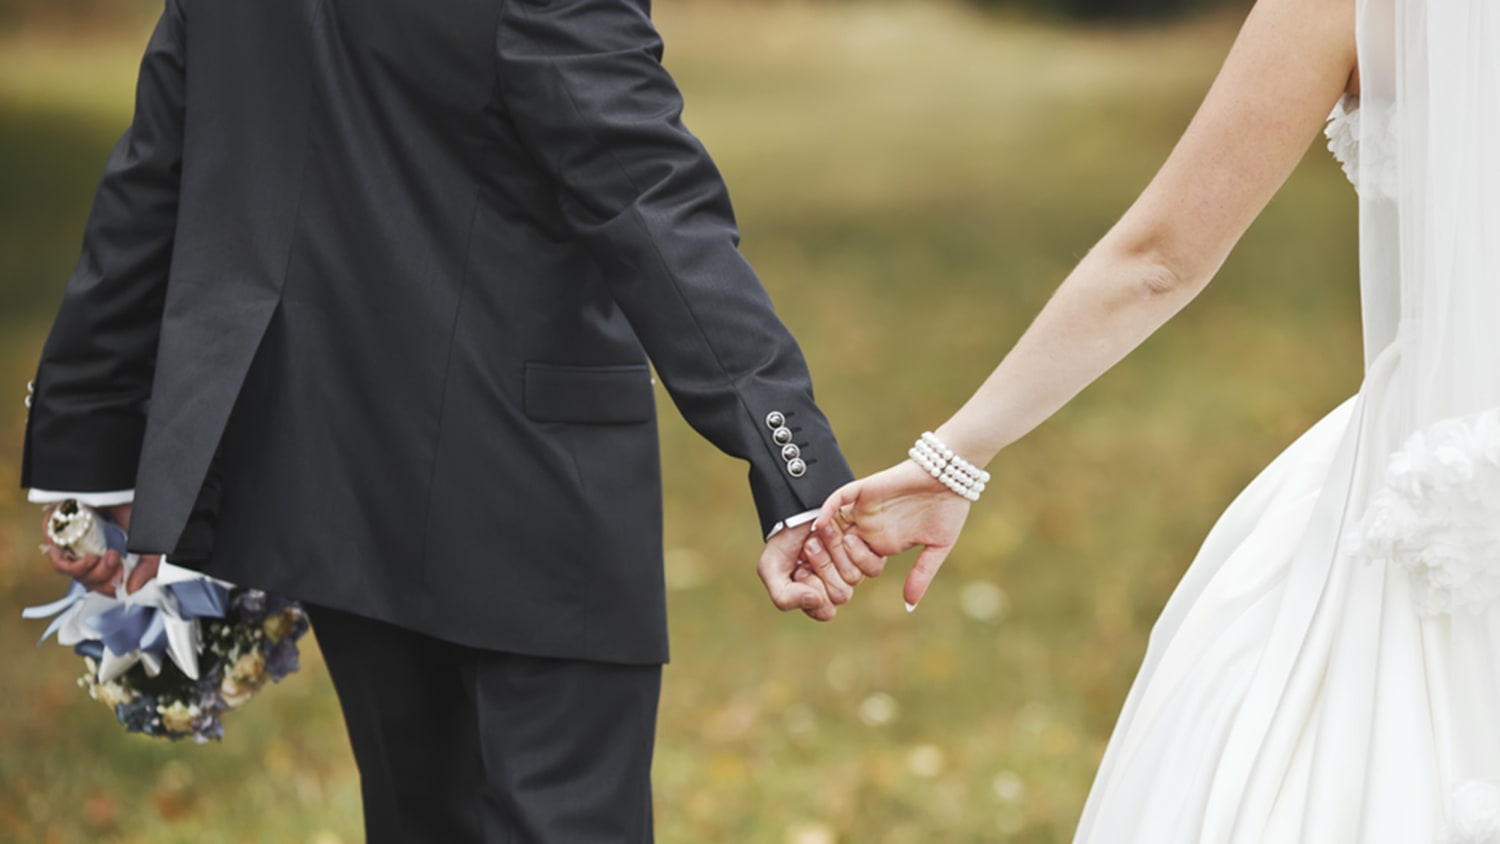 3 tips to make your marriage stronger and happier than ever - TODAY.com